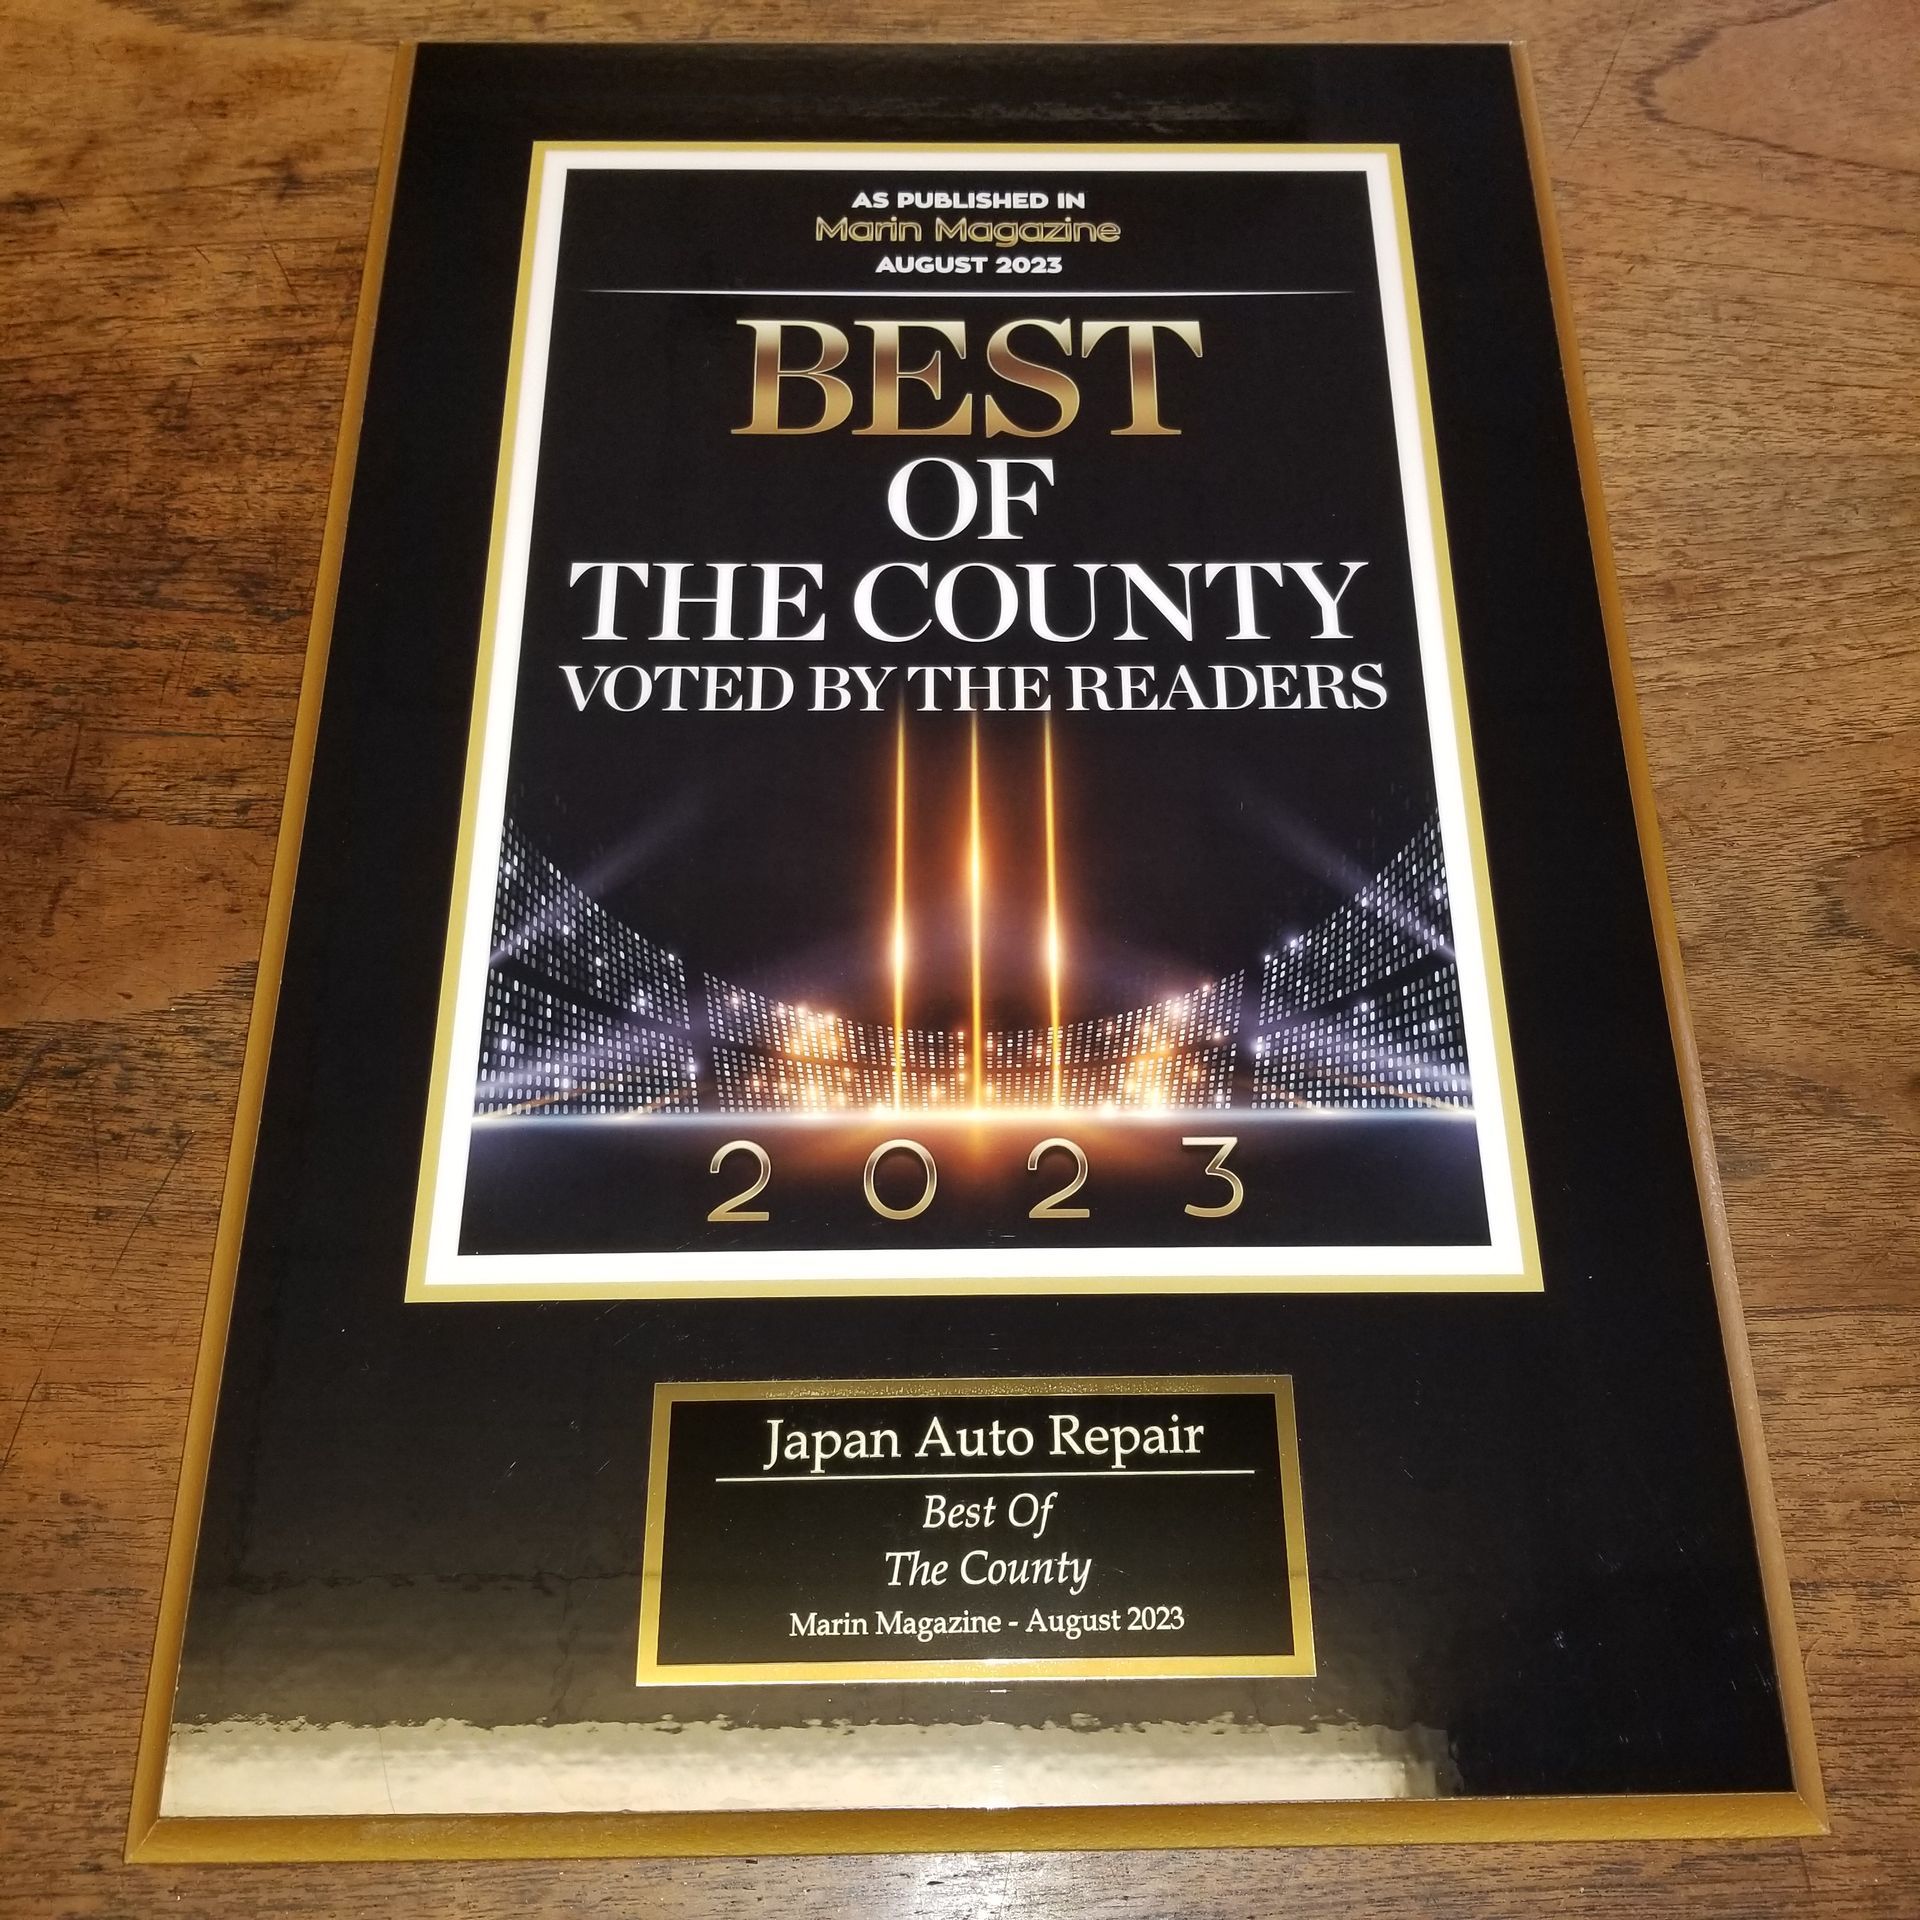 Best of the County 2023 Award